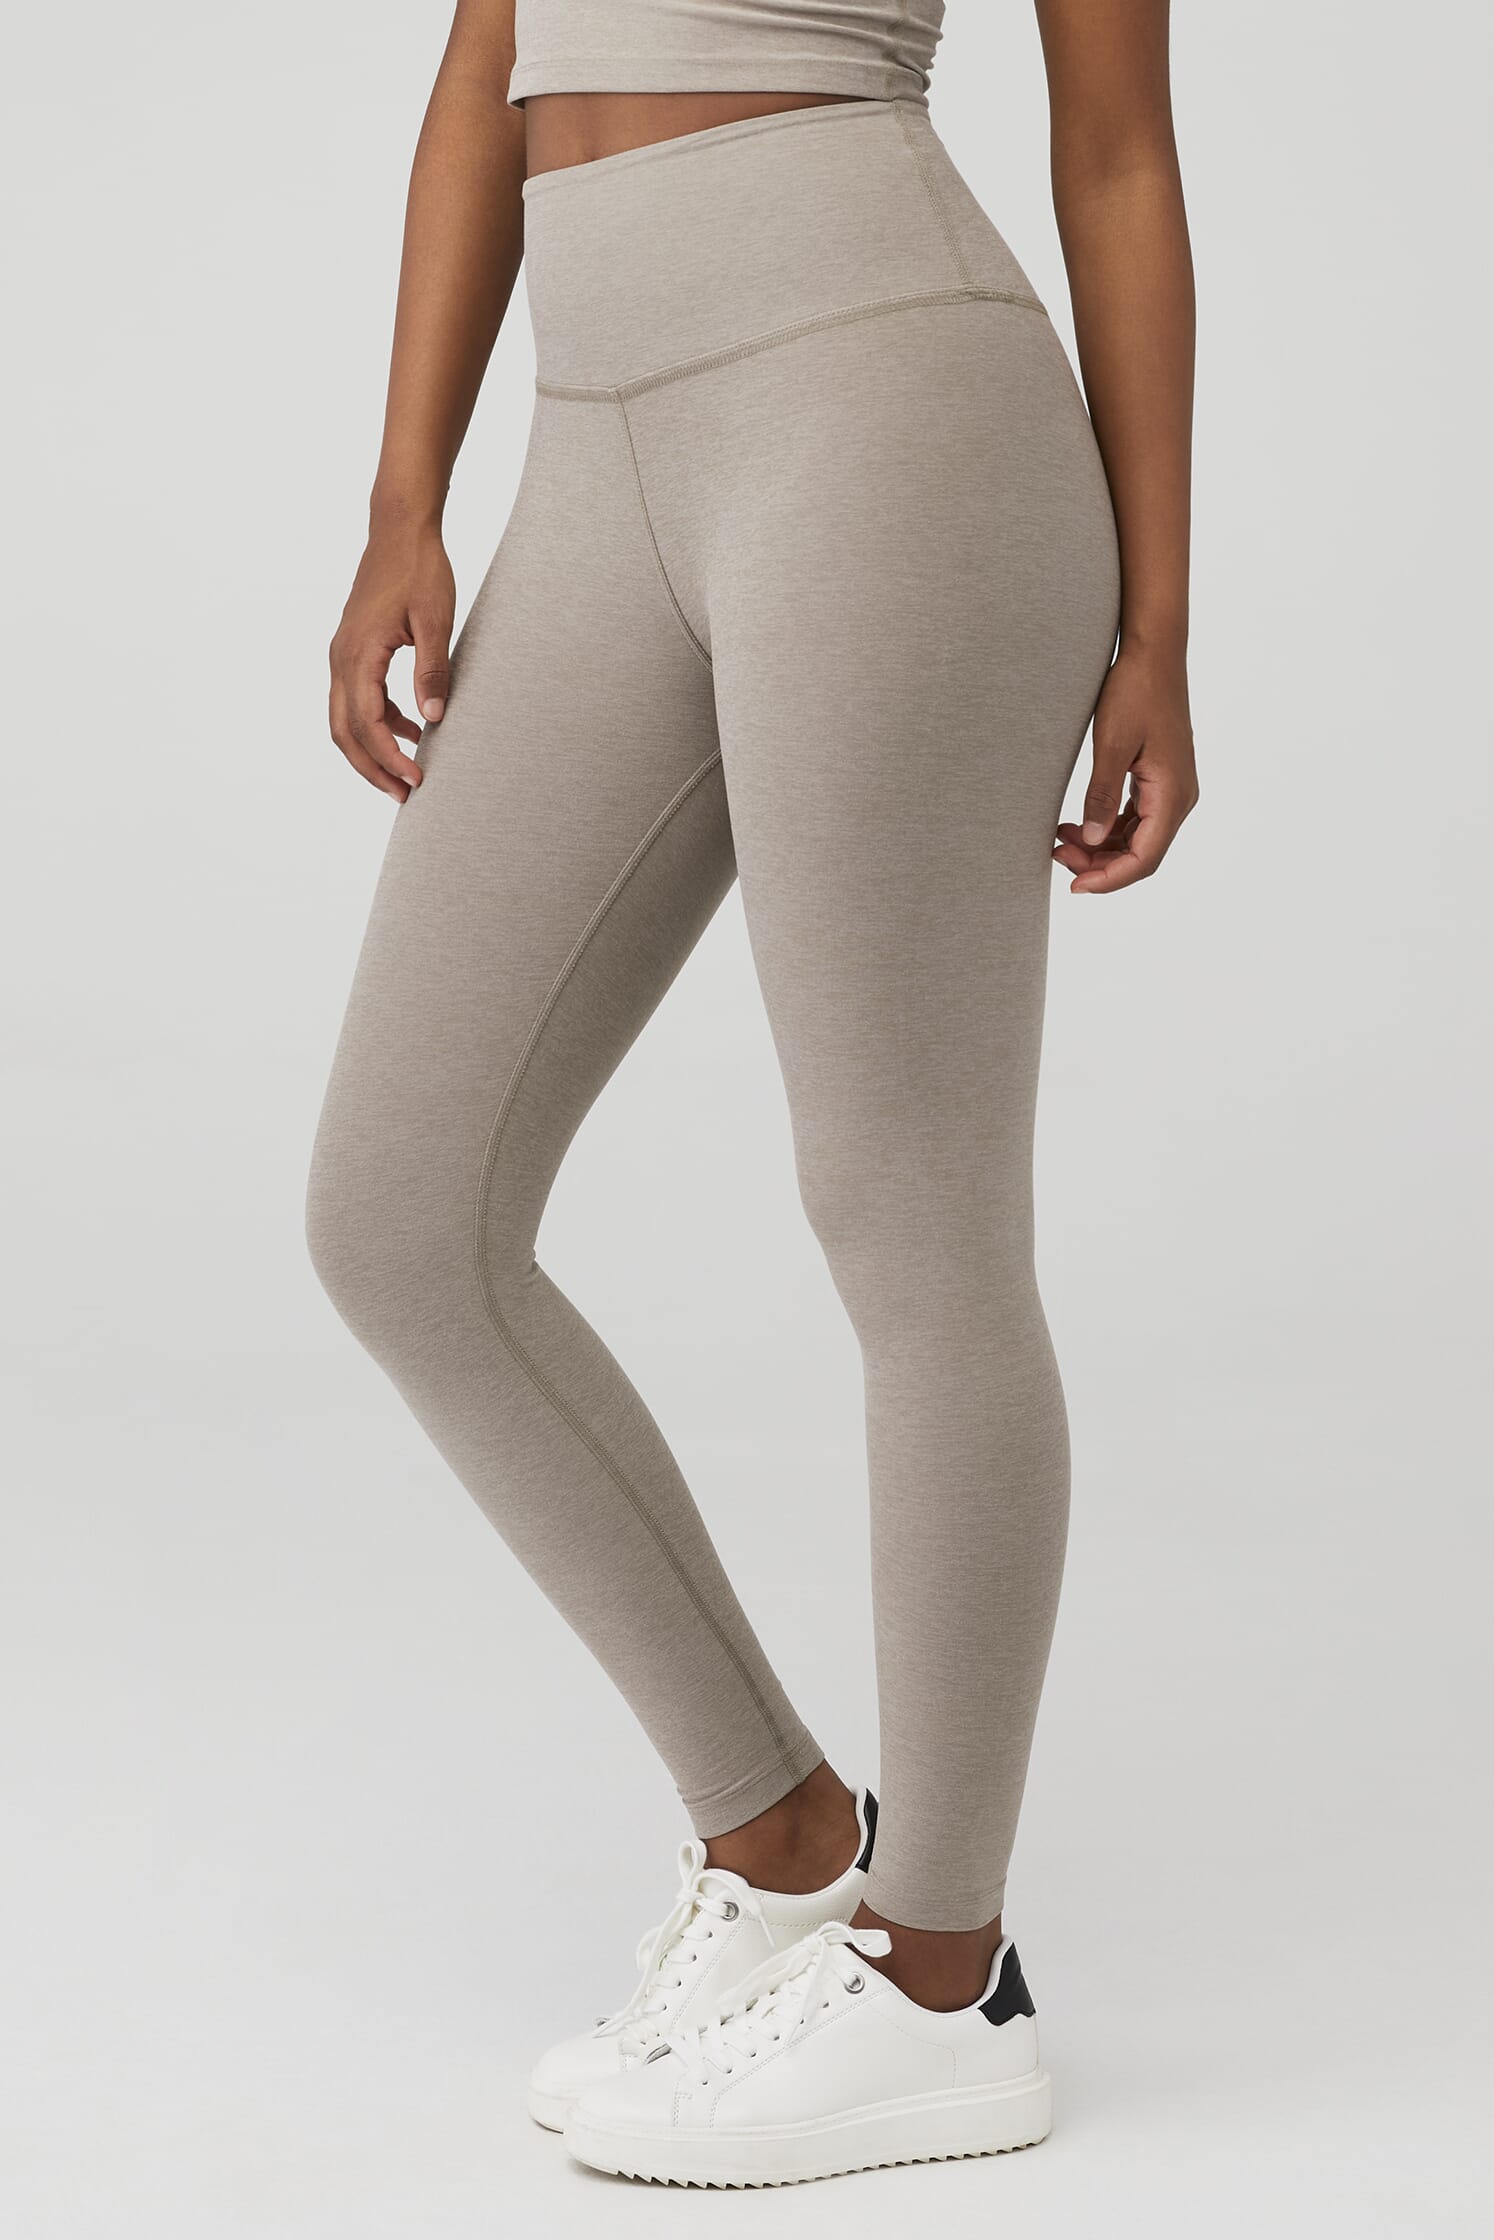 https://images.fashionpass.com/products/spacedye-caught-in-the-midi-high-waisted-legging-beyond-yoga-birch-heather-1b3-2.jpg?profile=a